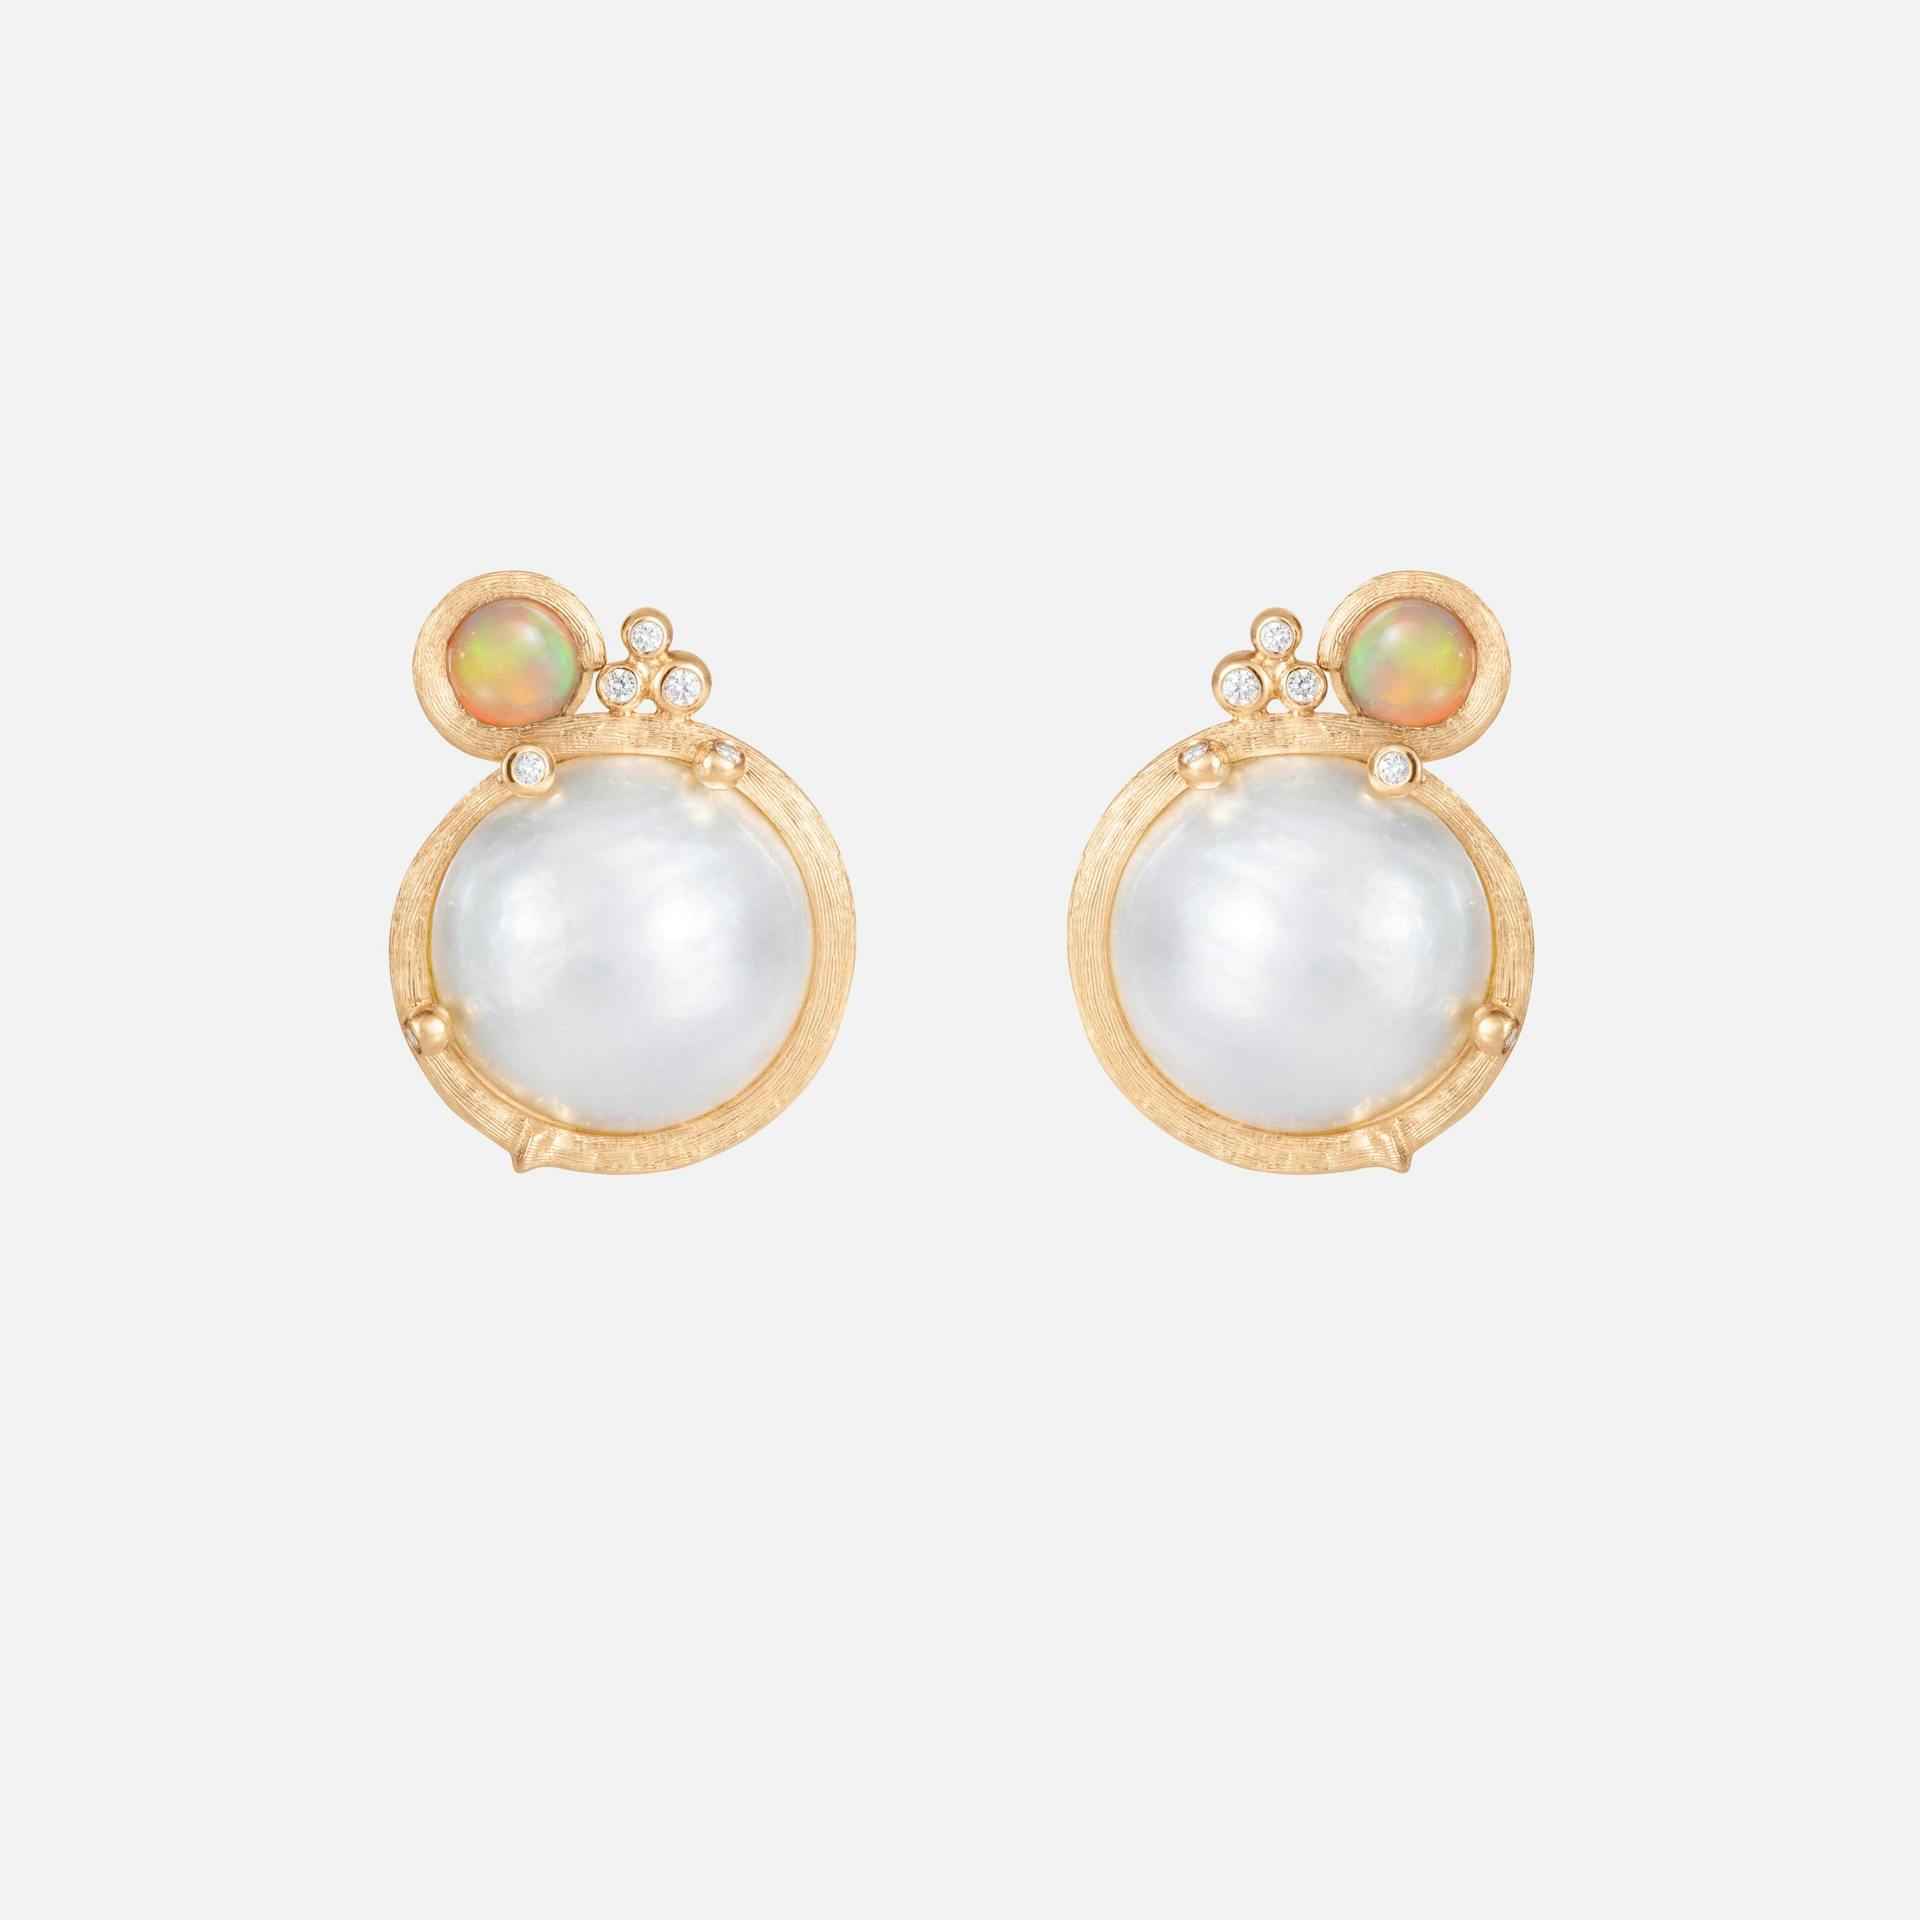 BoHo earclips small 18k gold with mabe pearl and opal
